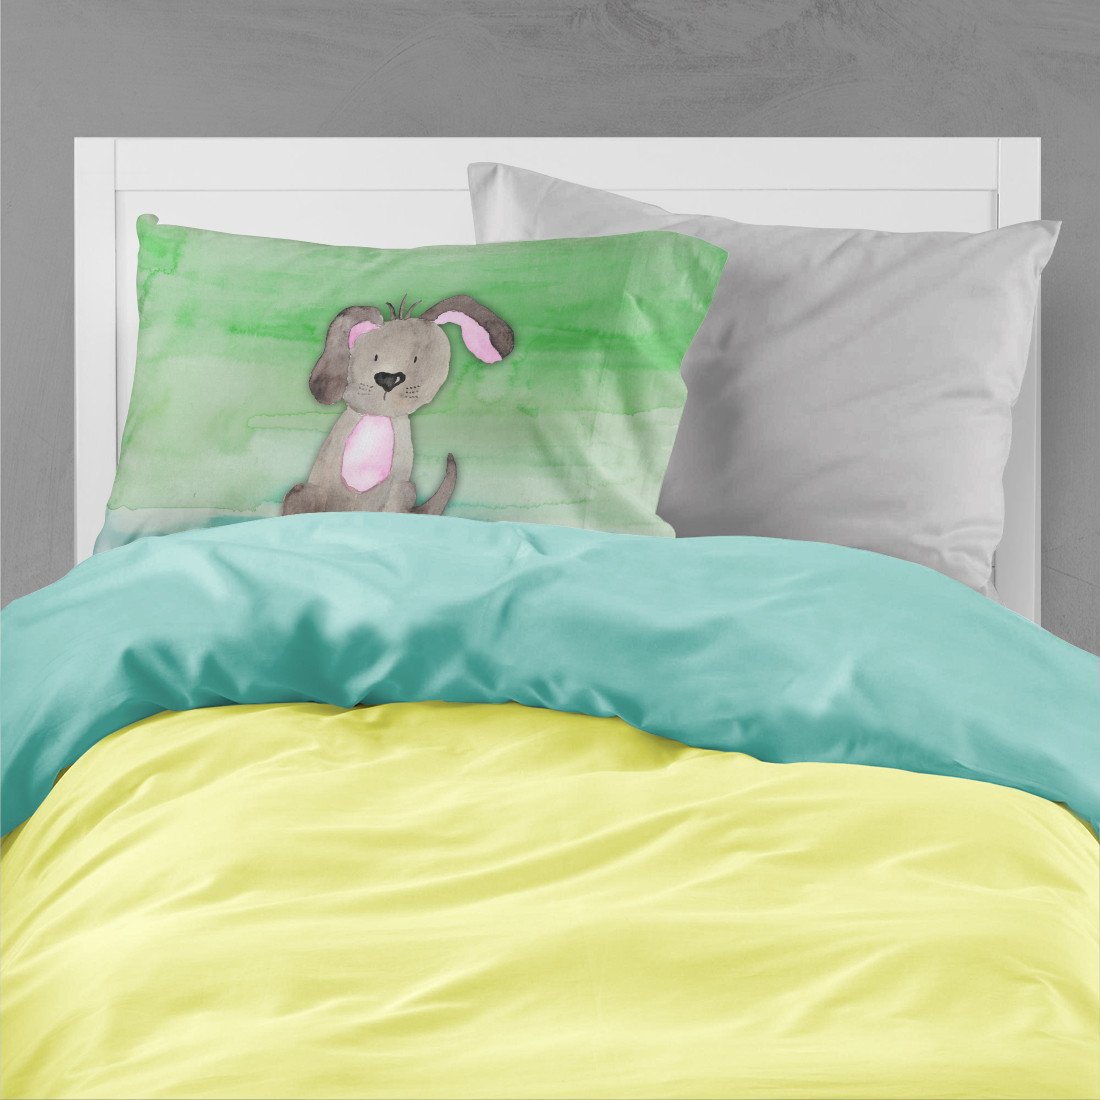 Dog Teal and Green Watercolor Fabric Standard Pillowcase BB7357PILLOWCASE by Caroline's Treasures